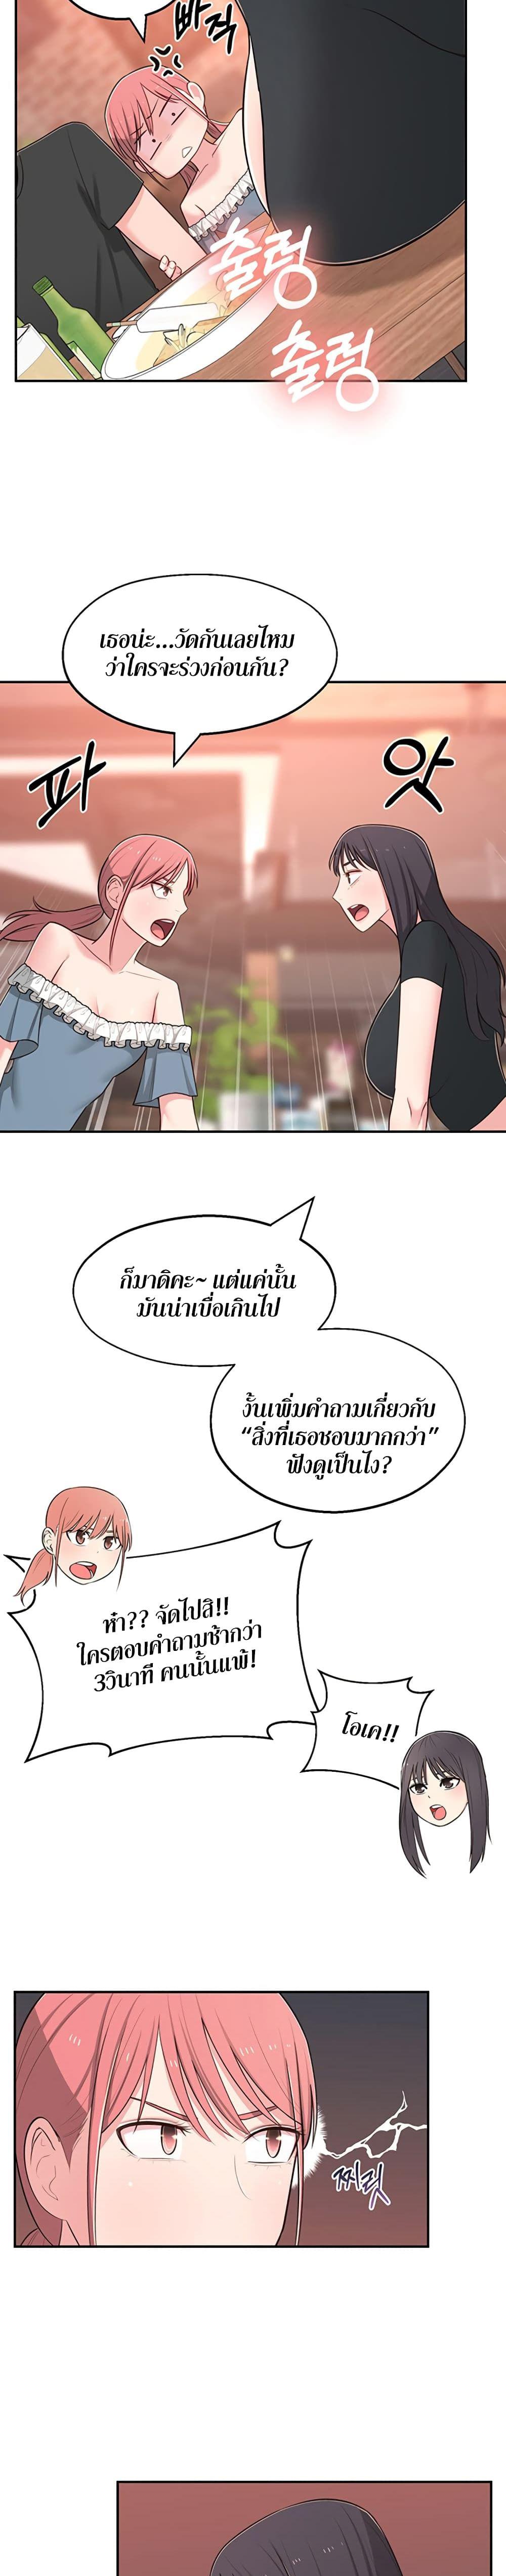 A Knowing Sister 13 ภาพ 12